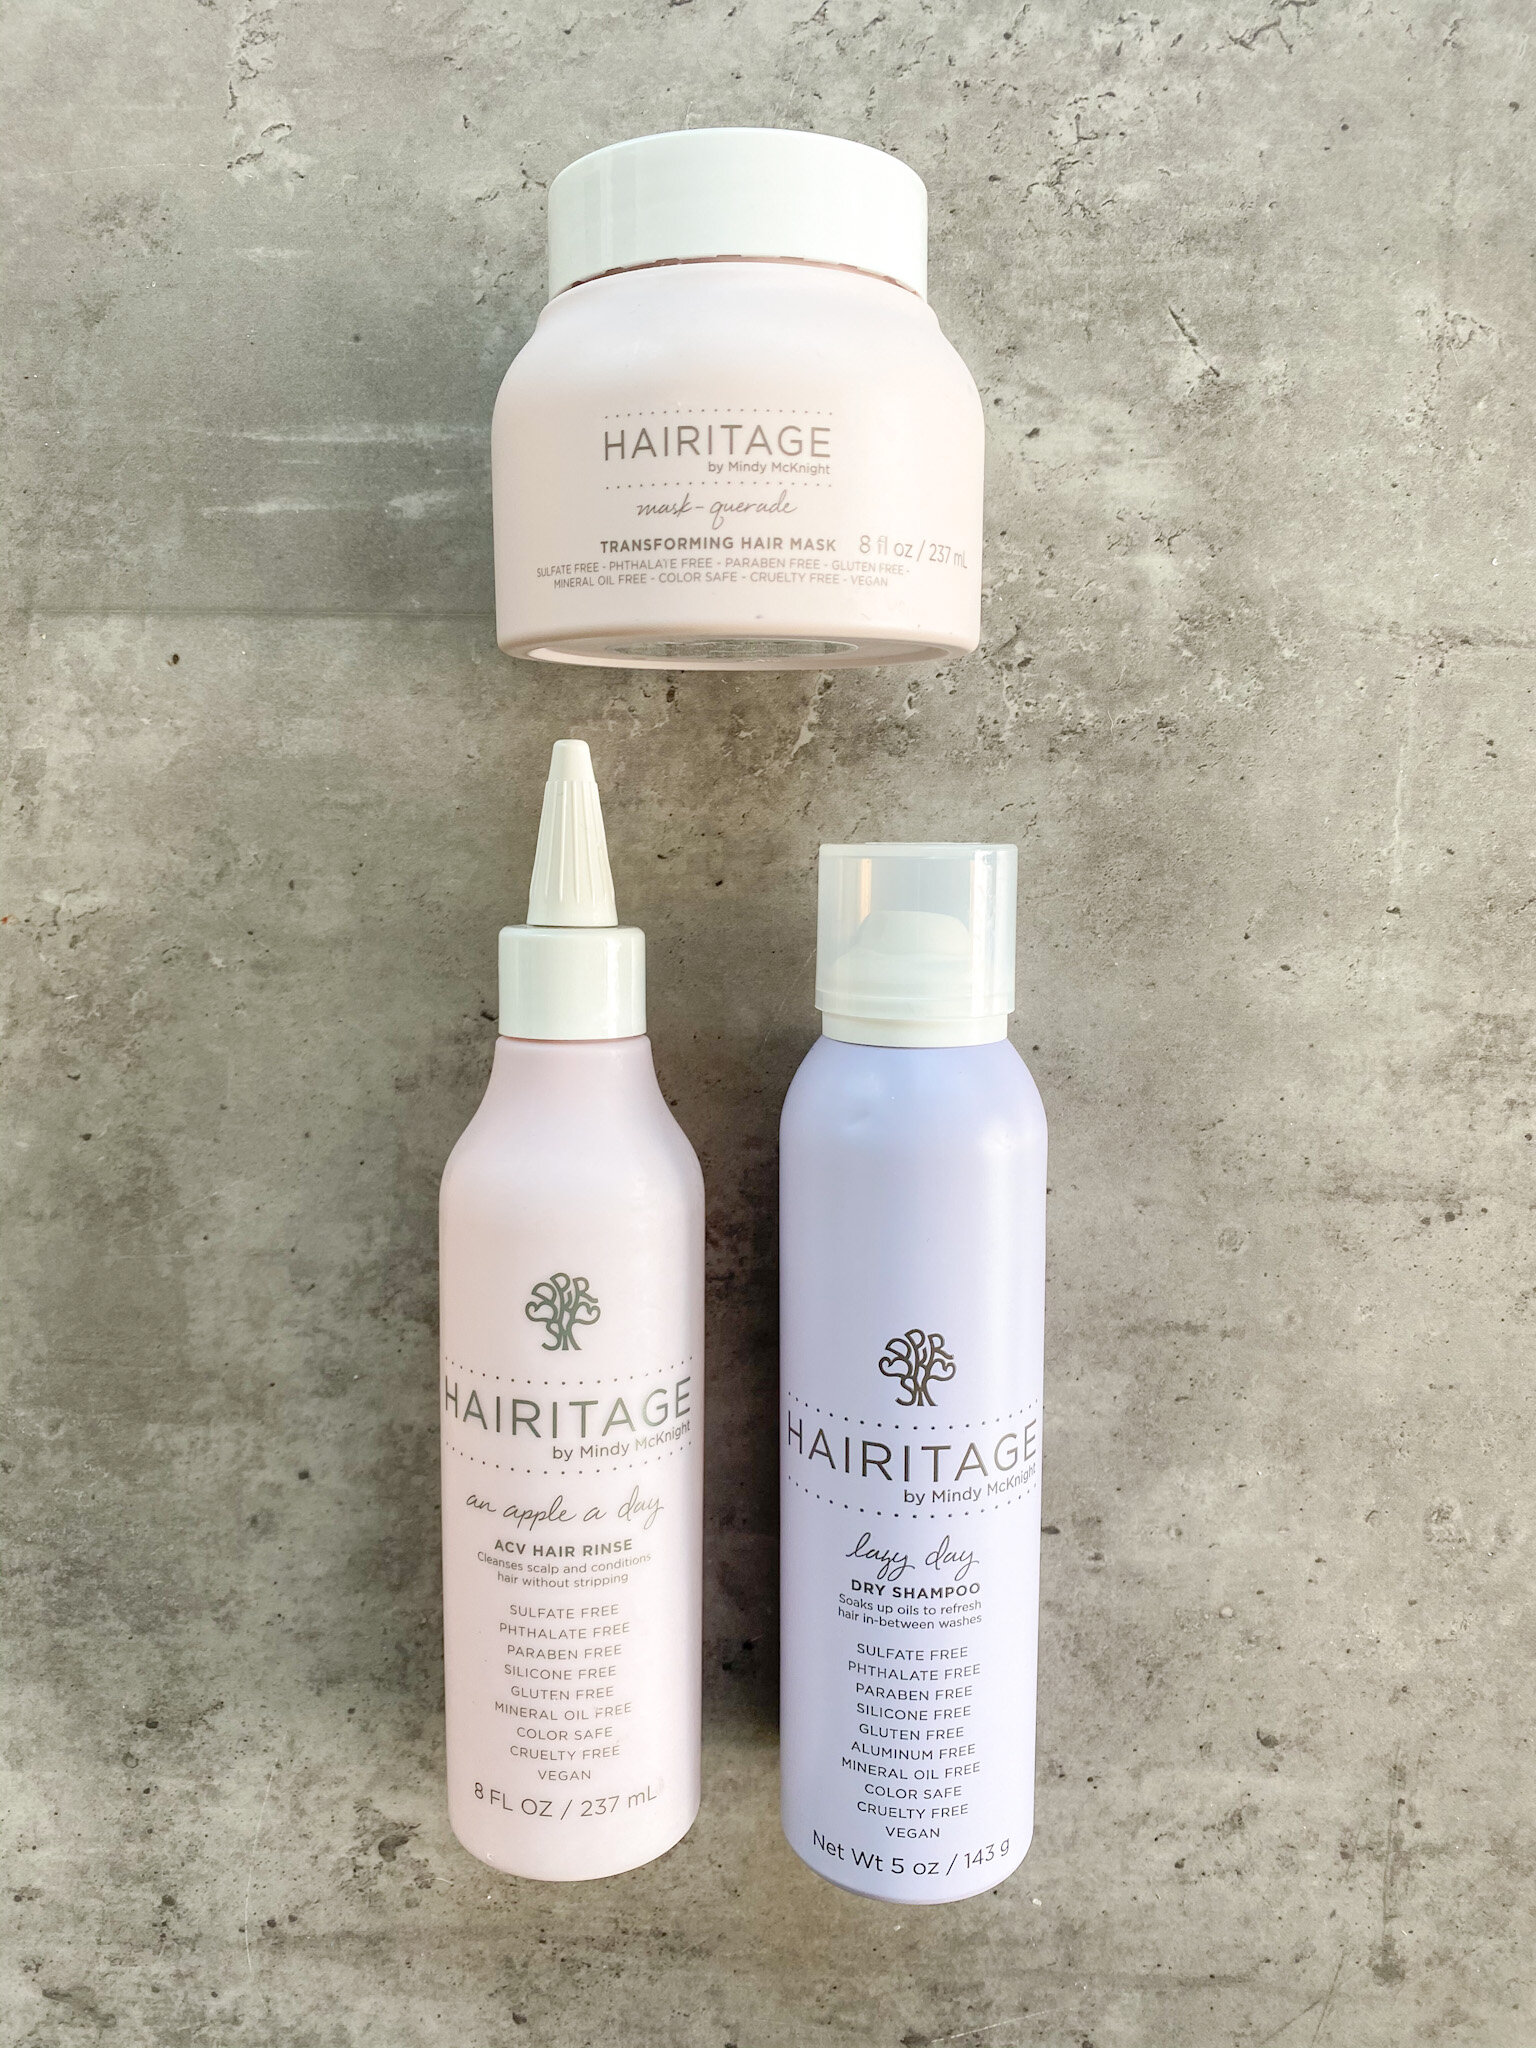 www.tarynintotravel.com | Hairitage by Mindy Hairline | Shampoo and Conditioner Review | Dry Shampoo | An apple a day acv hair rinse | Walmart Finds 